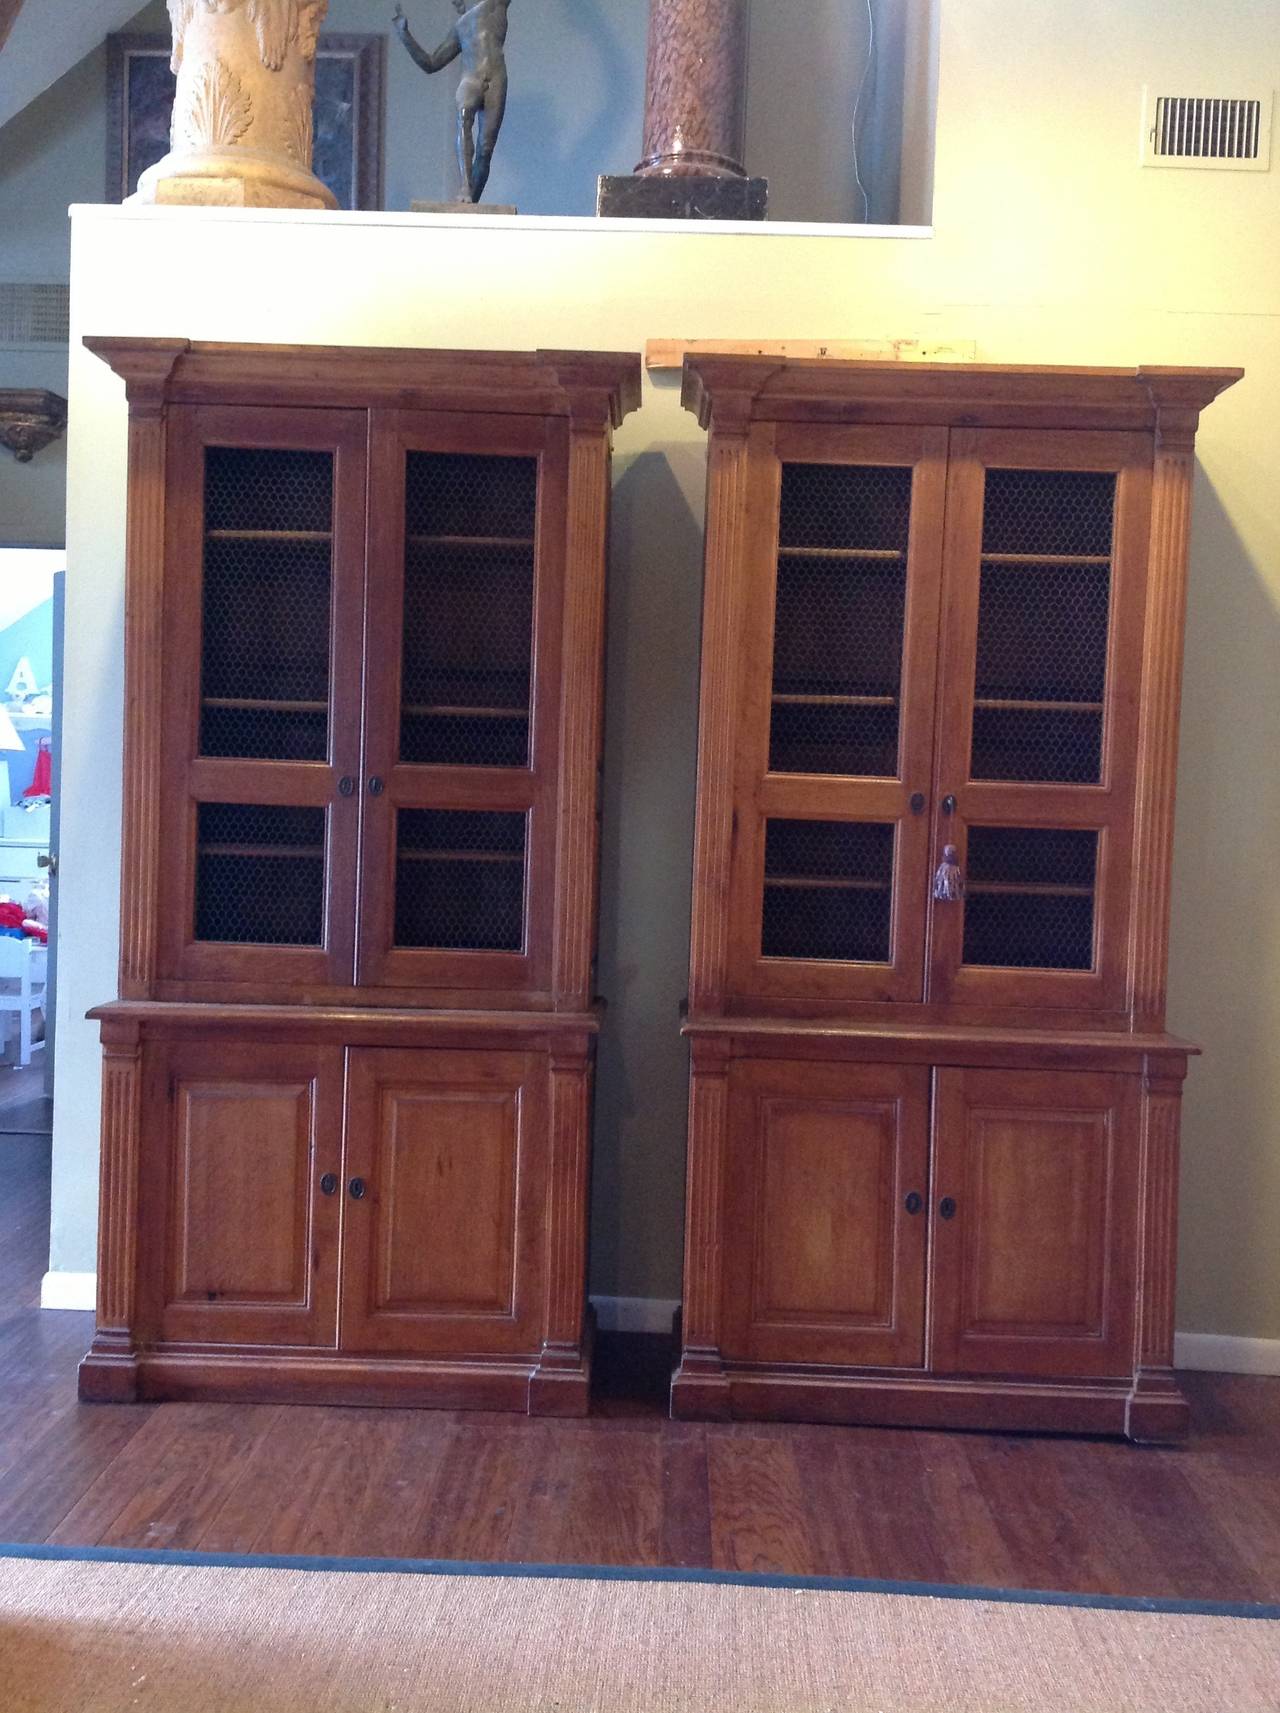 A very handsome and hard to find pair of oak, early 19th century two-part bookcases or display cabinets with original wire doors, and adjustable shelves, on top and bottom.
These cabinets are in very good age appropriate condition and their use can